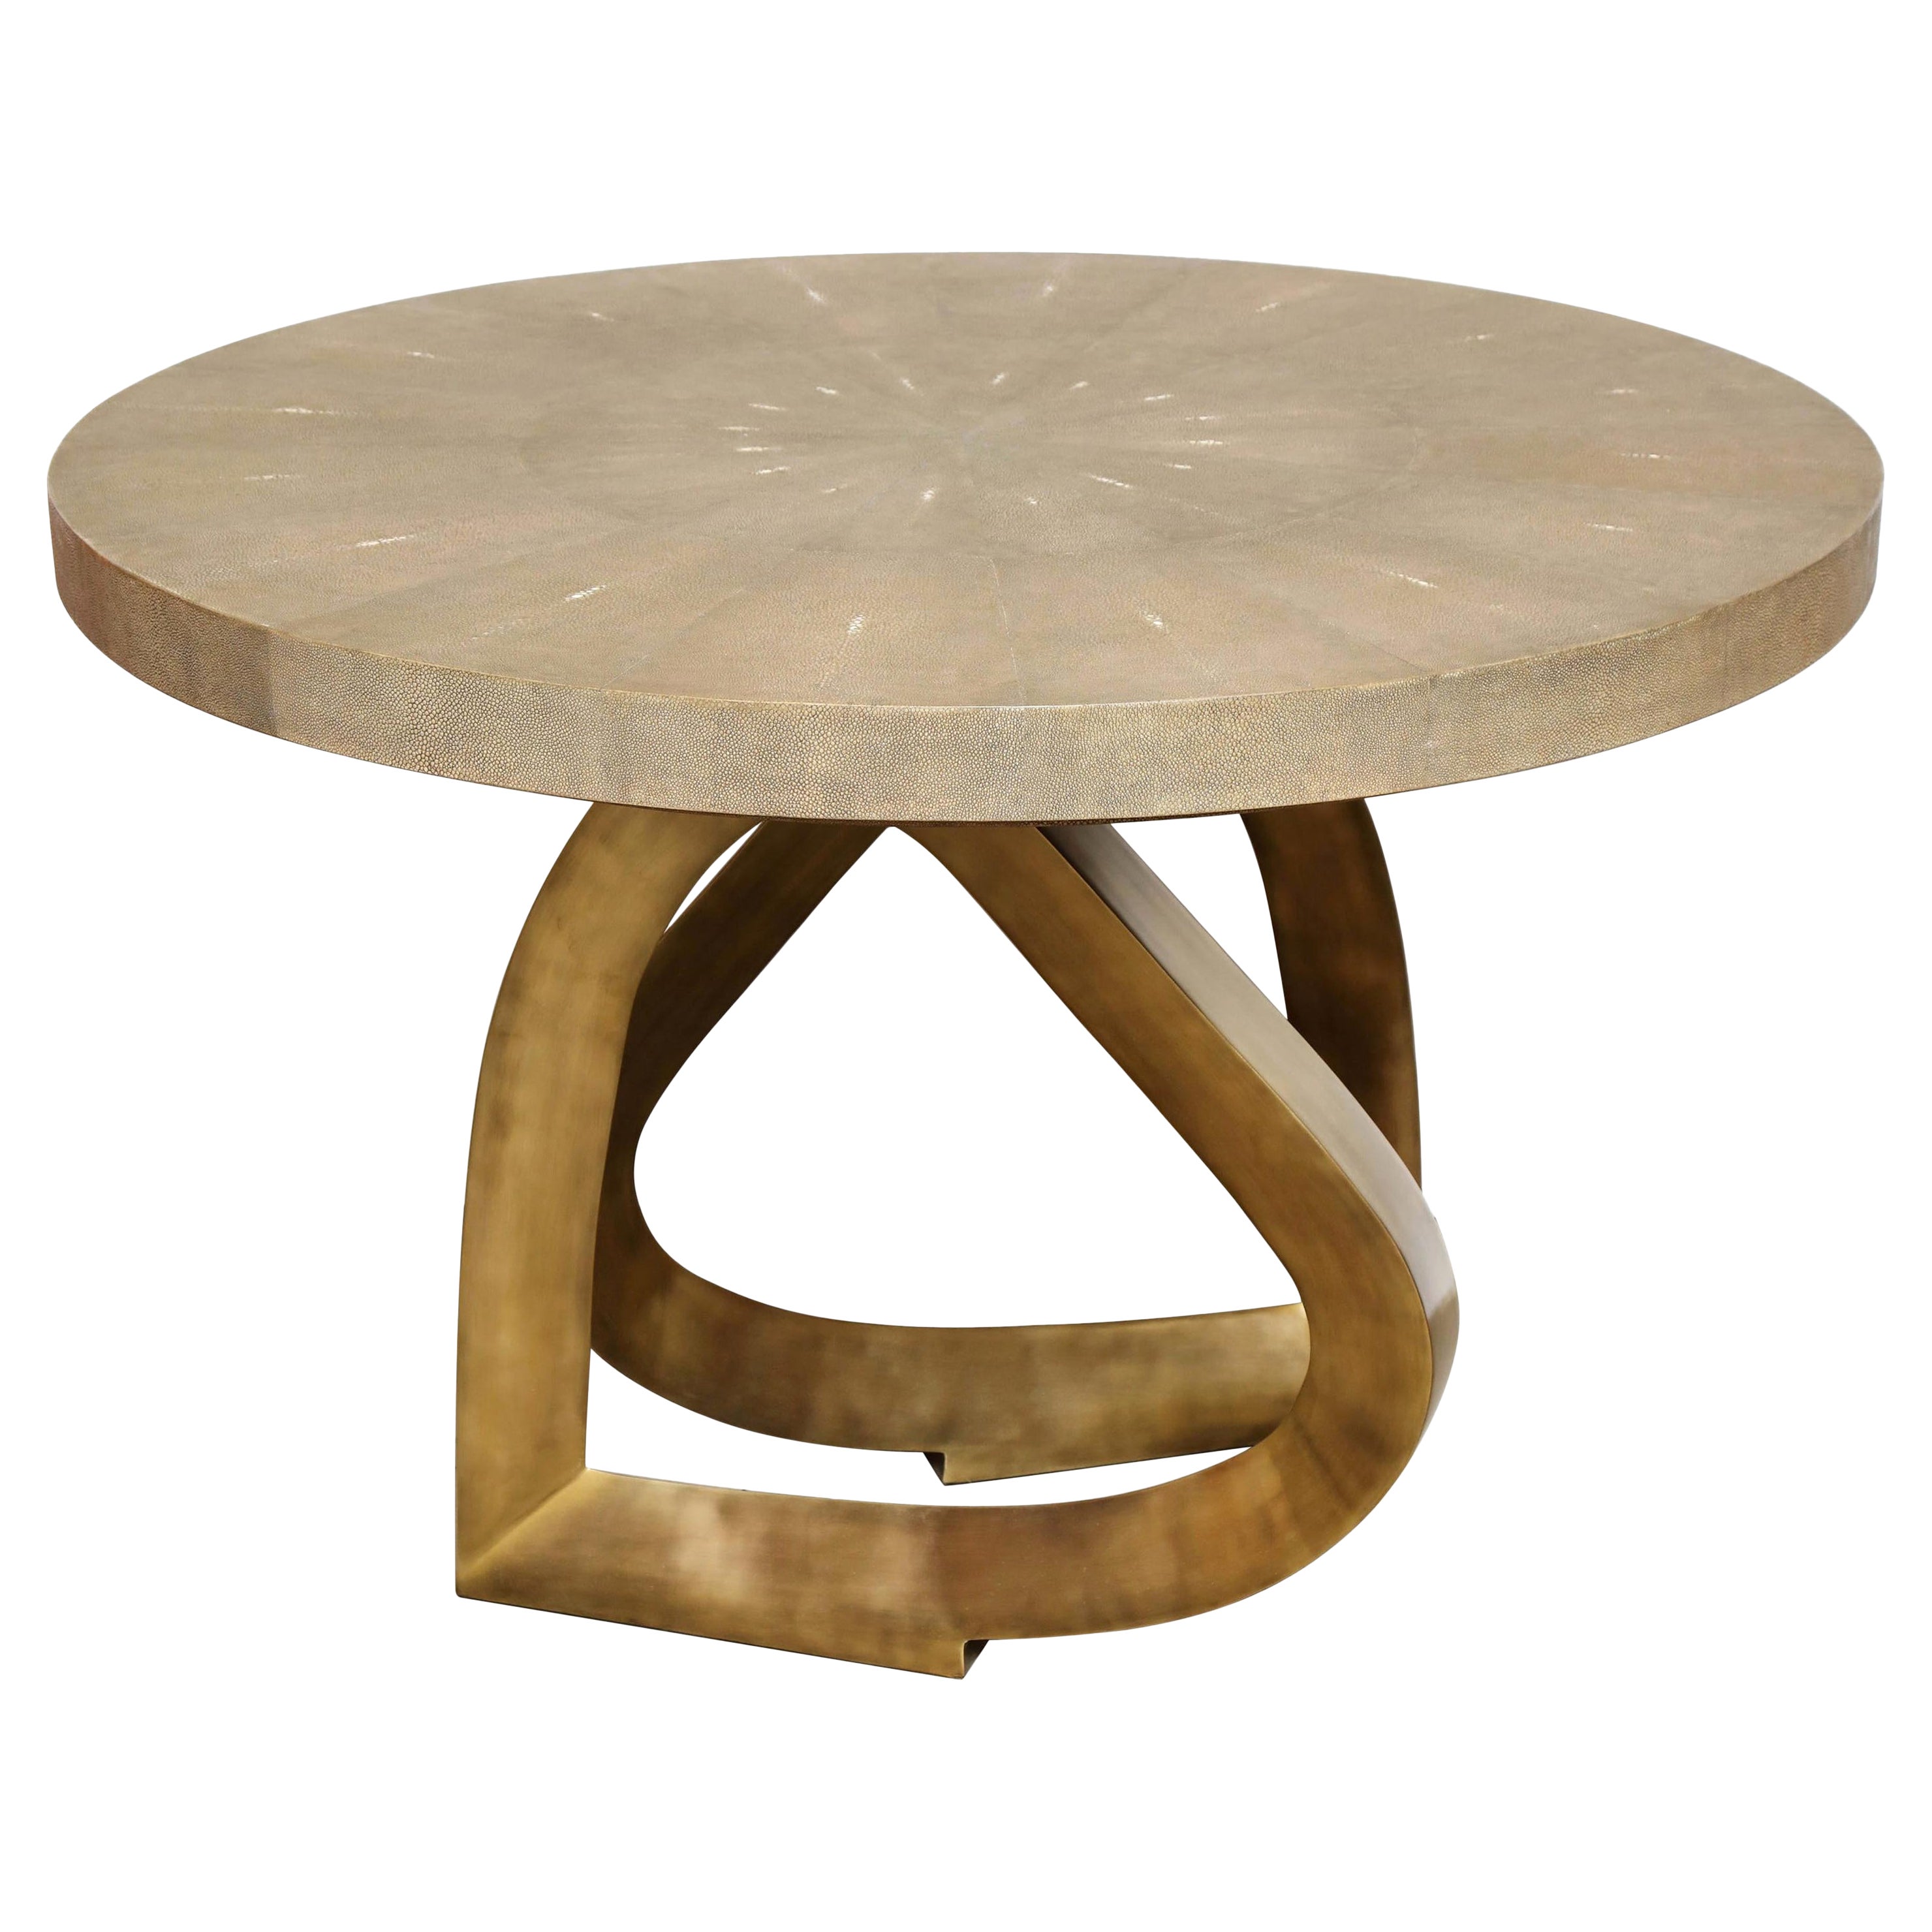 Shagreen Dining Room Table with Brass Base, Contemporary, Khaki Color Shagreen